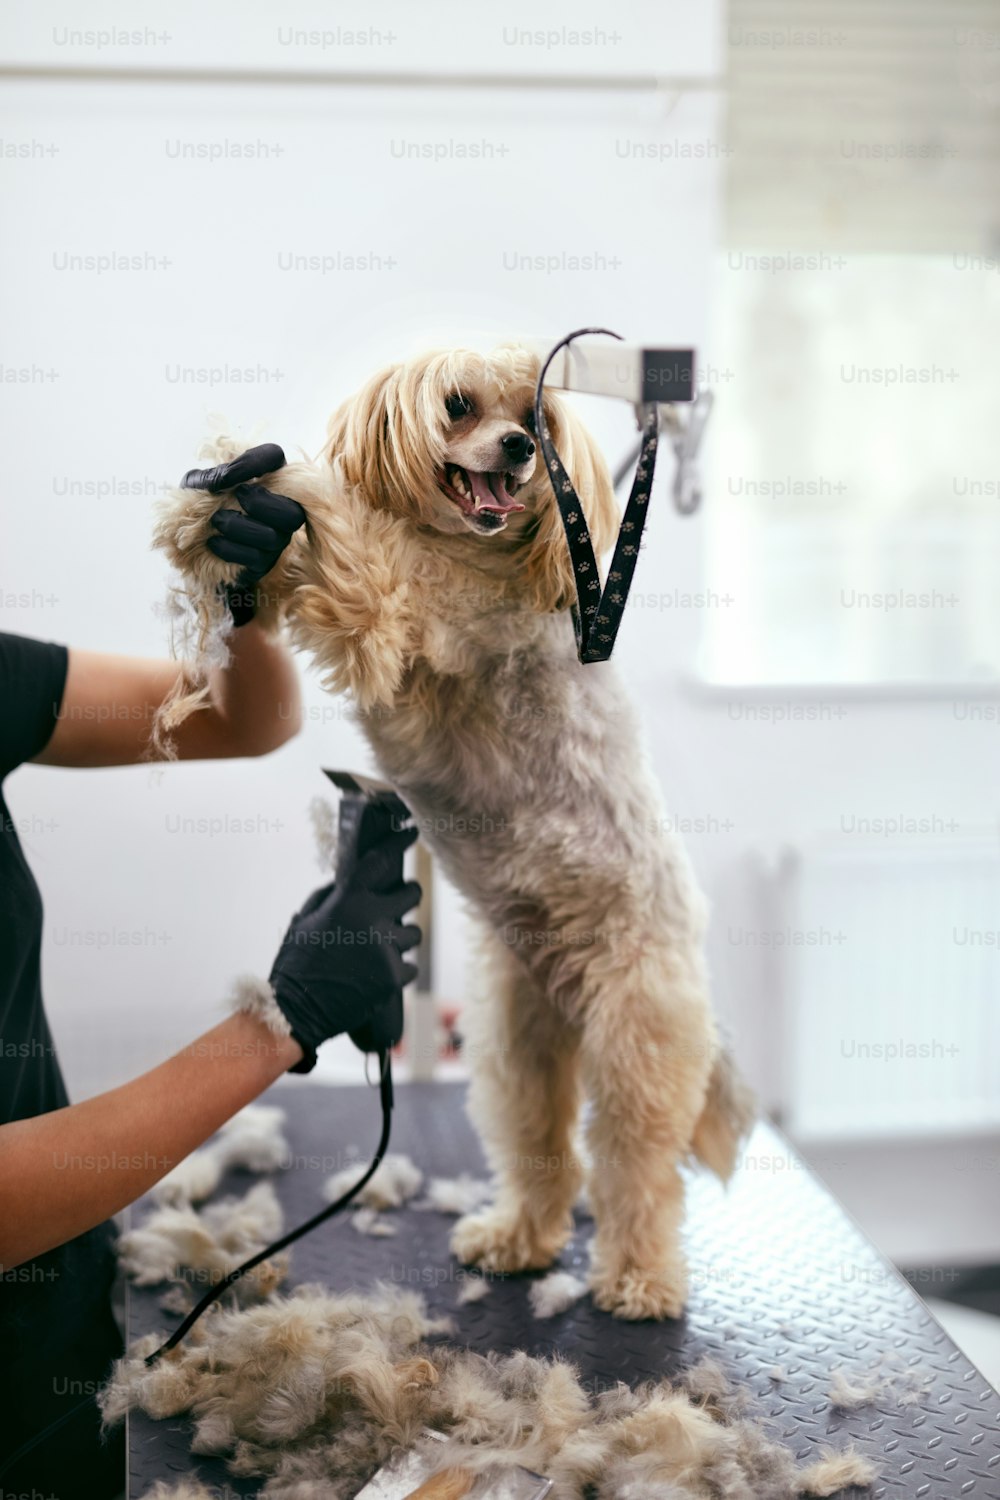 Dog Hair Cut. Groomer Grooming Dog With Trimmer At Pet Salon, Cutting Animal's Hair. High Resolution